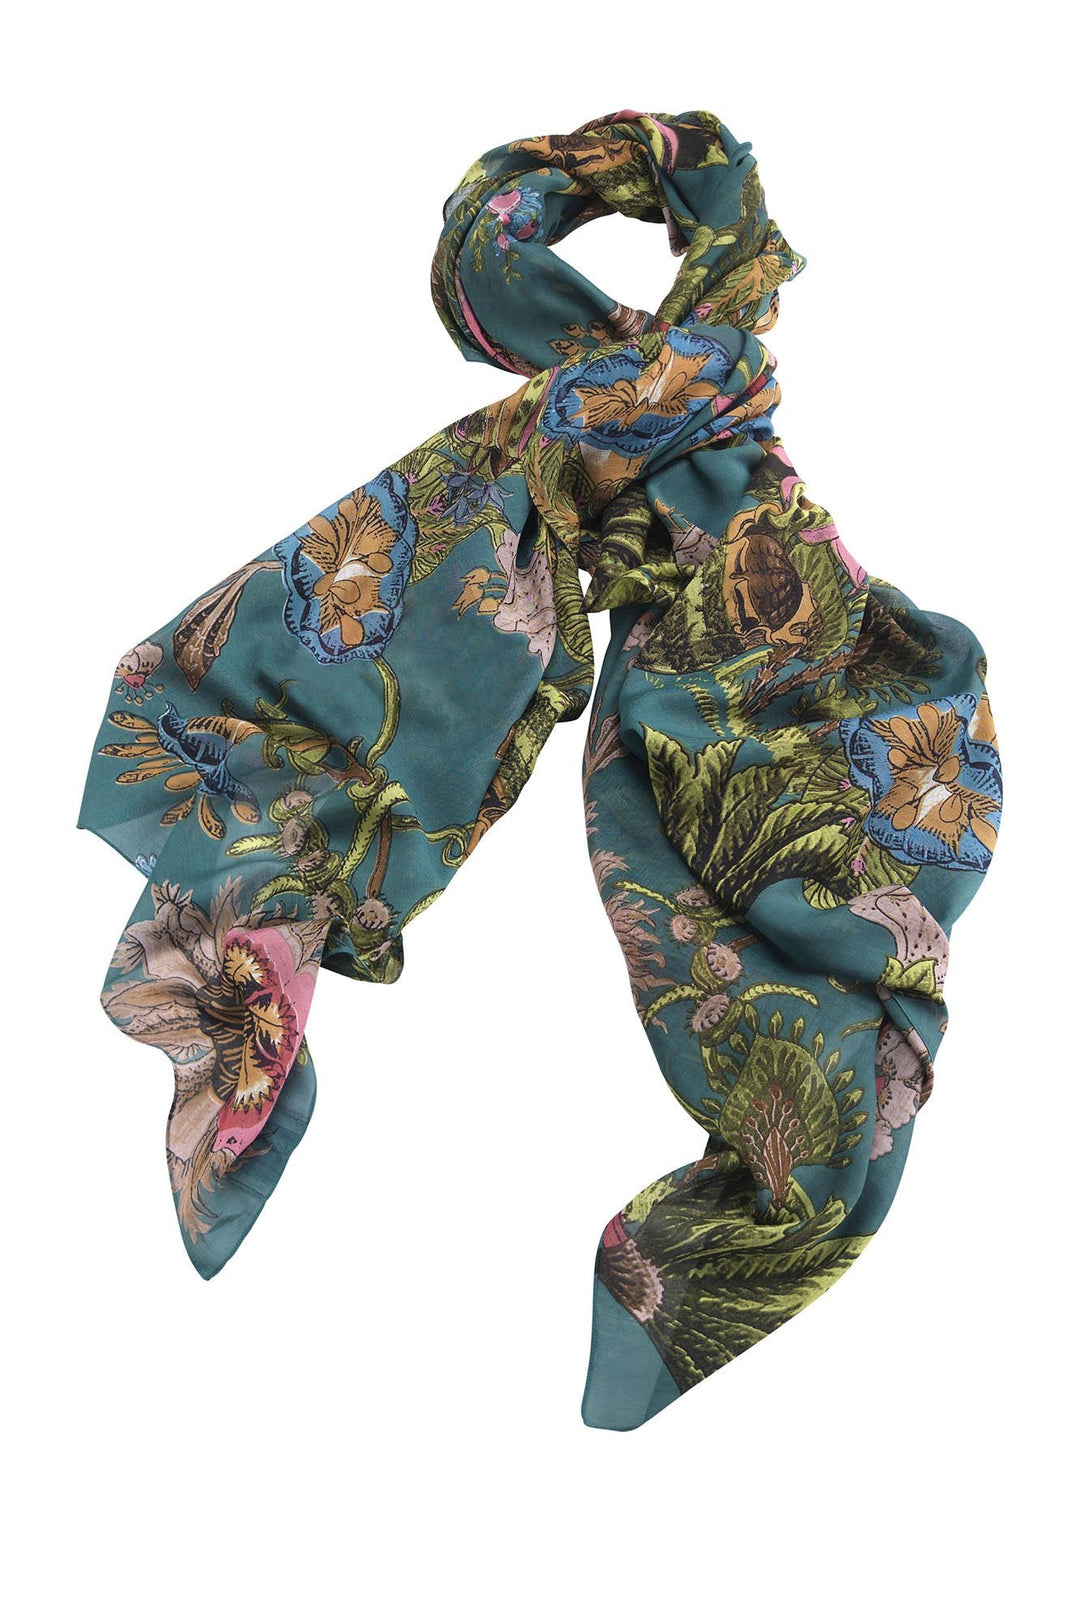 Eccentric Blooms Teal Scarf - One Hundred Stars